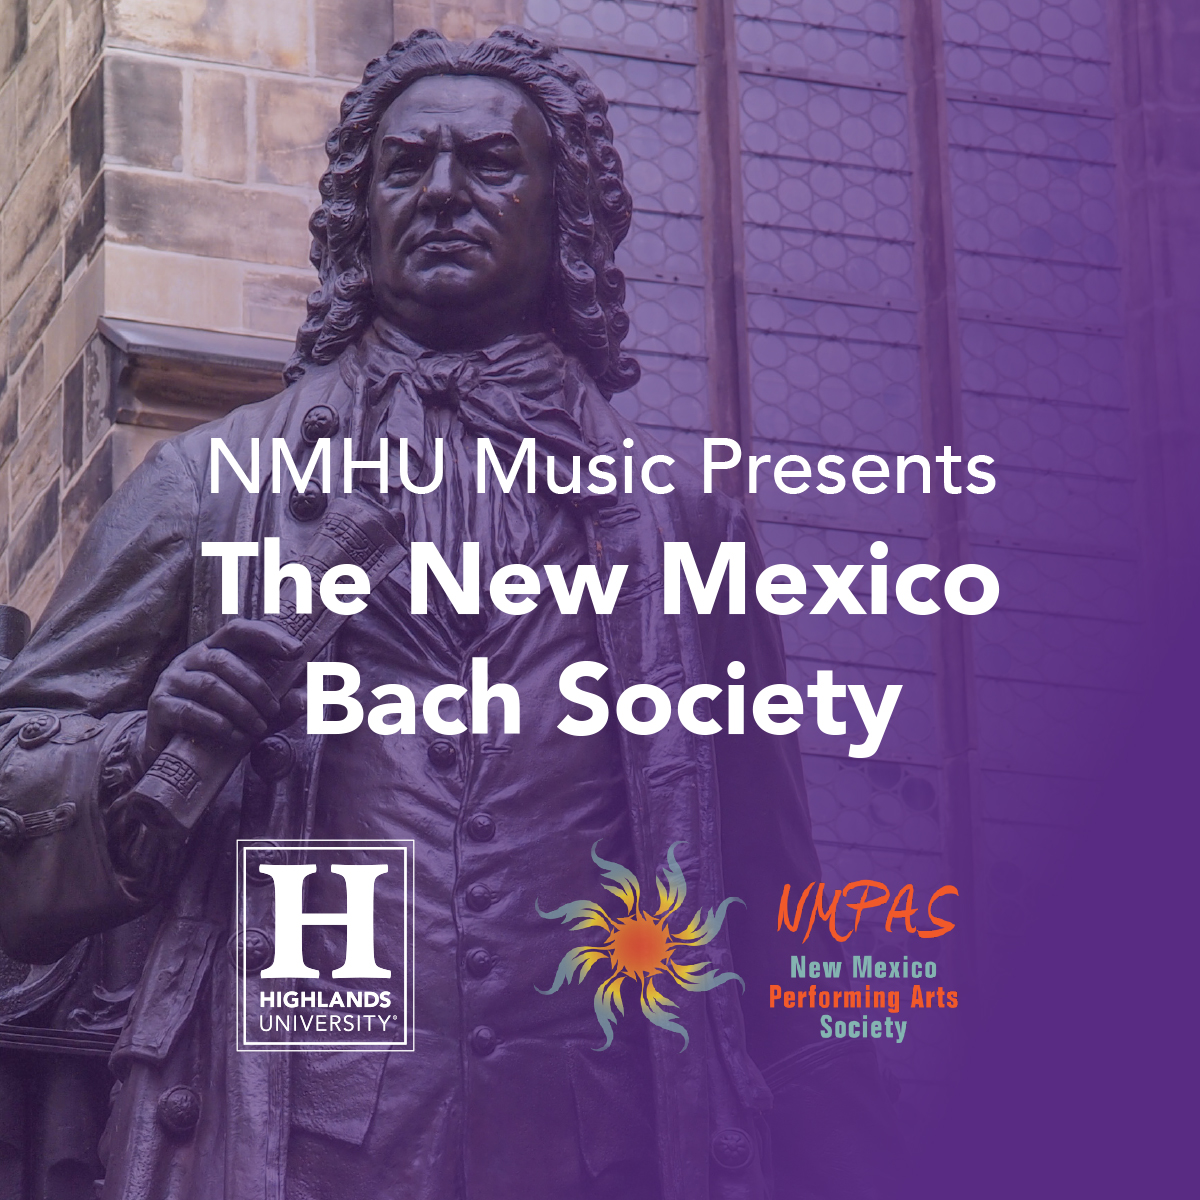 Poster of Bach statue "The New Mexico Bach Society"